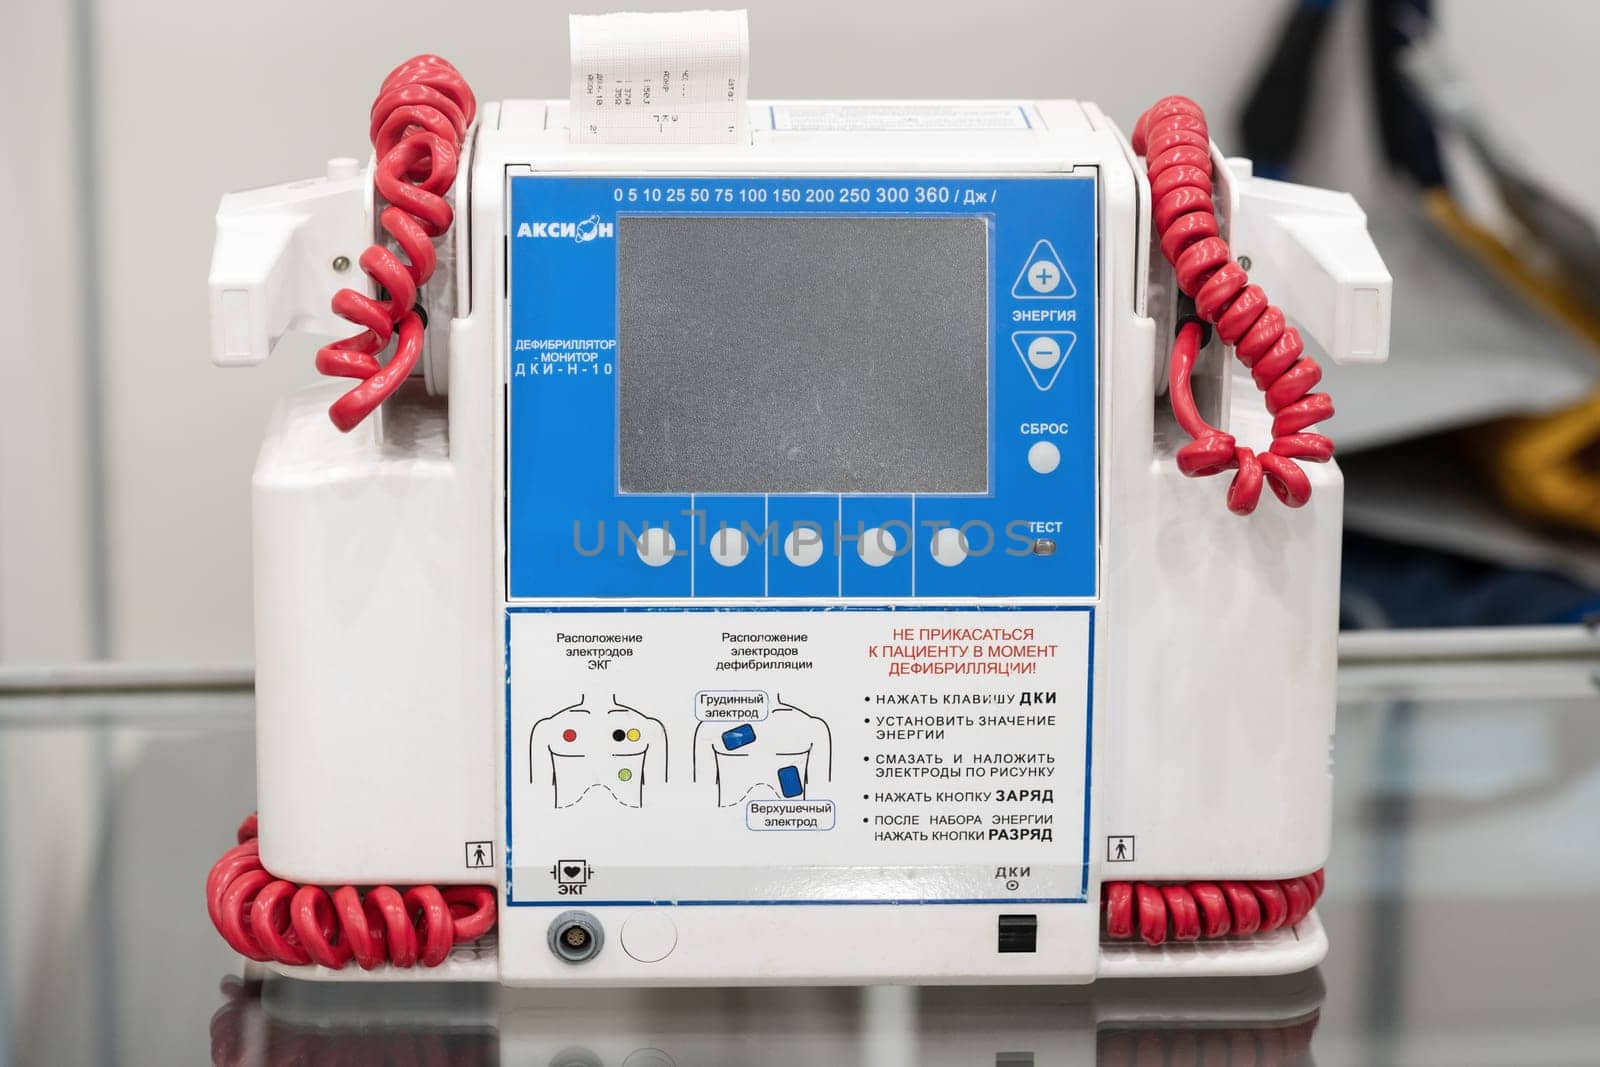 Russian portable defibrillator monitor Axion DKI-N-10 is used in medical hospitals, cardiological dispensaries, to equip emergency and emergency medical teams. Kamchatka, Russia - Oct 17, 2019